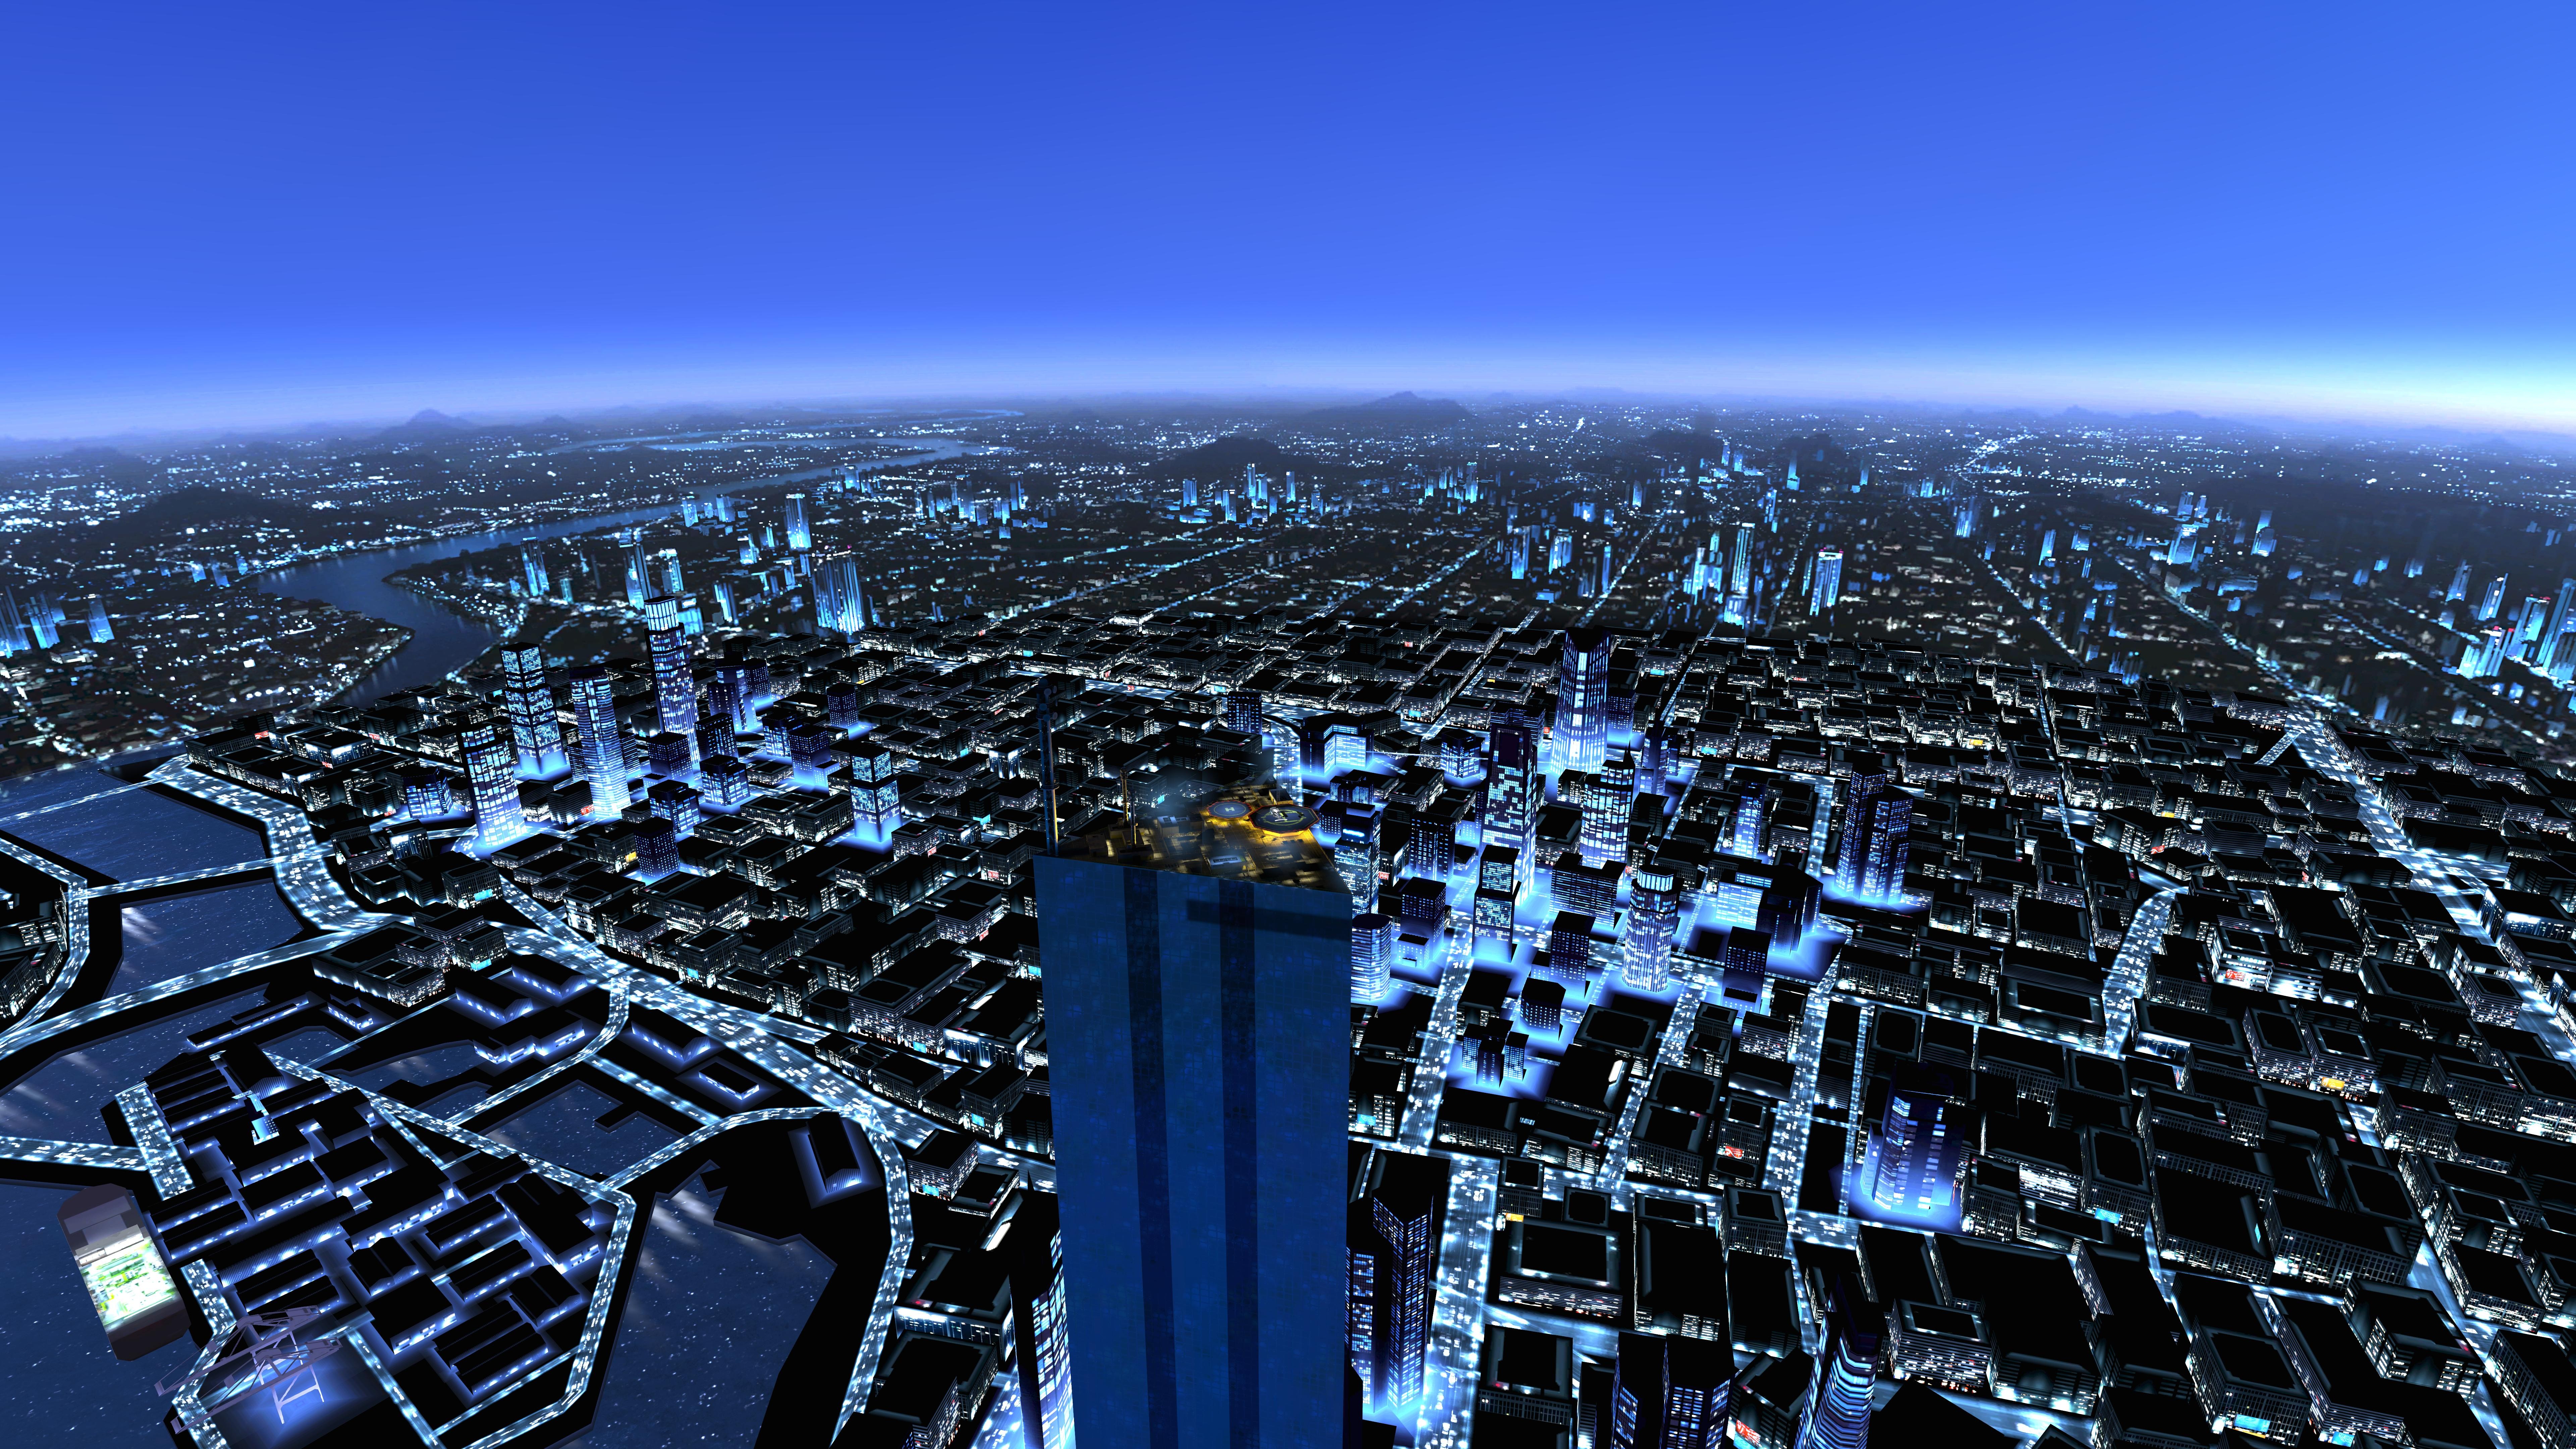 General 7680x4320 city Mirror's Edge The Shard video games PC gaming